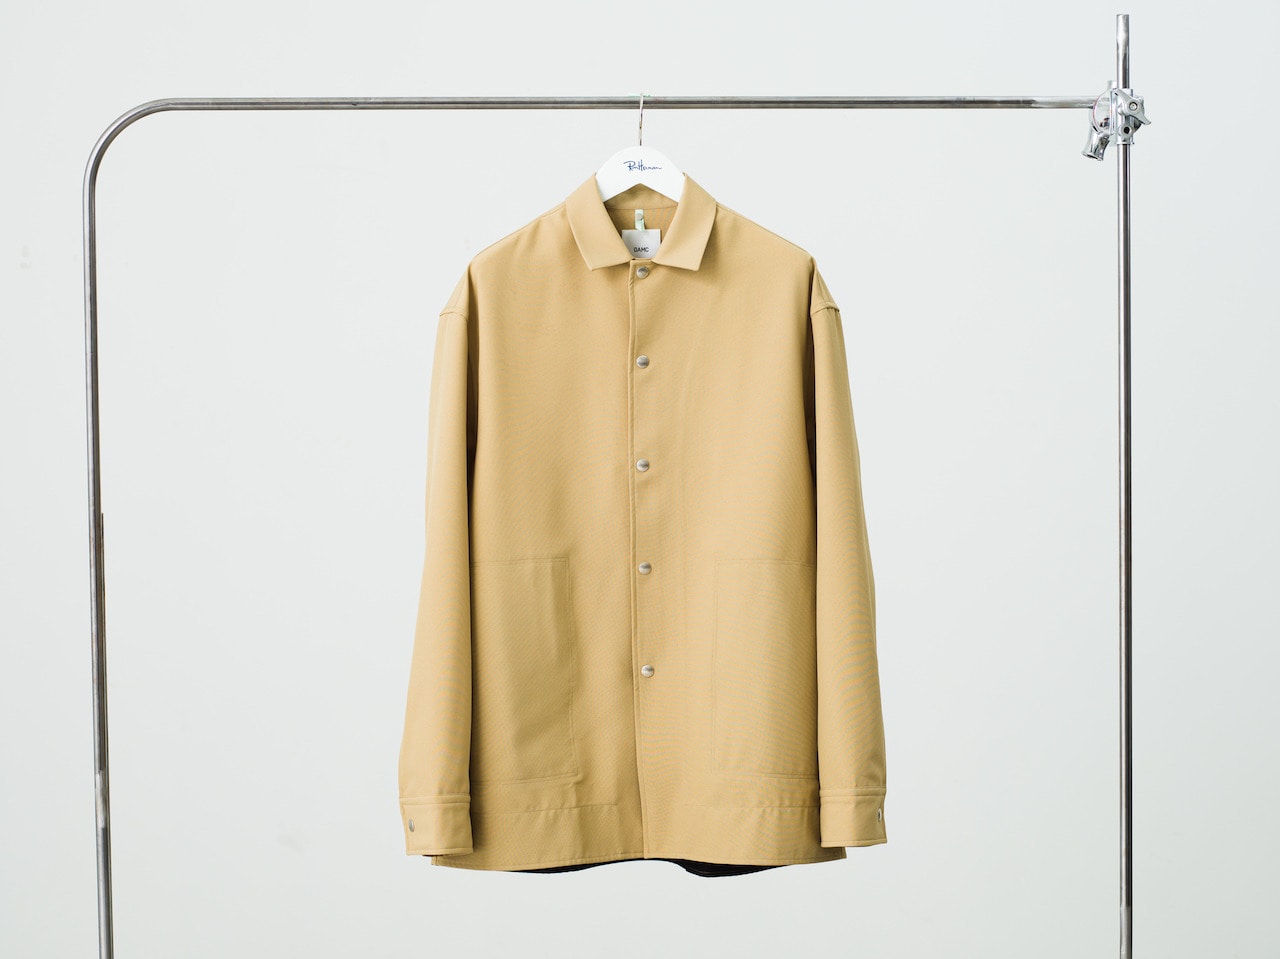 OAMC 2021FW Collection Jammer Shirt New Arrival